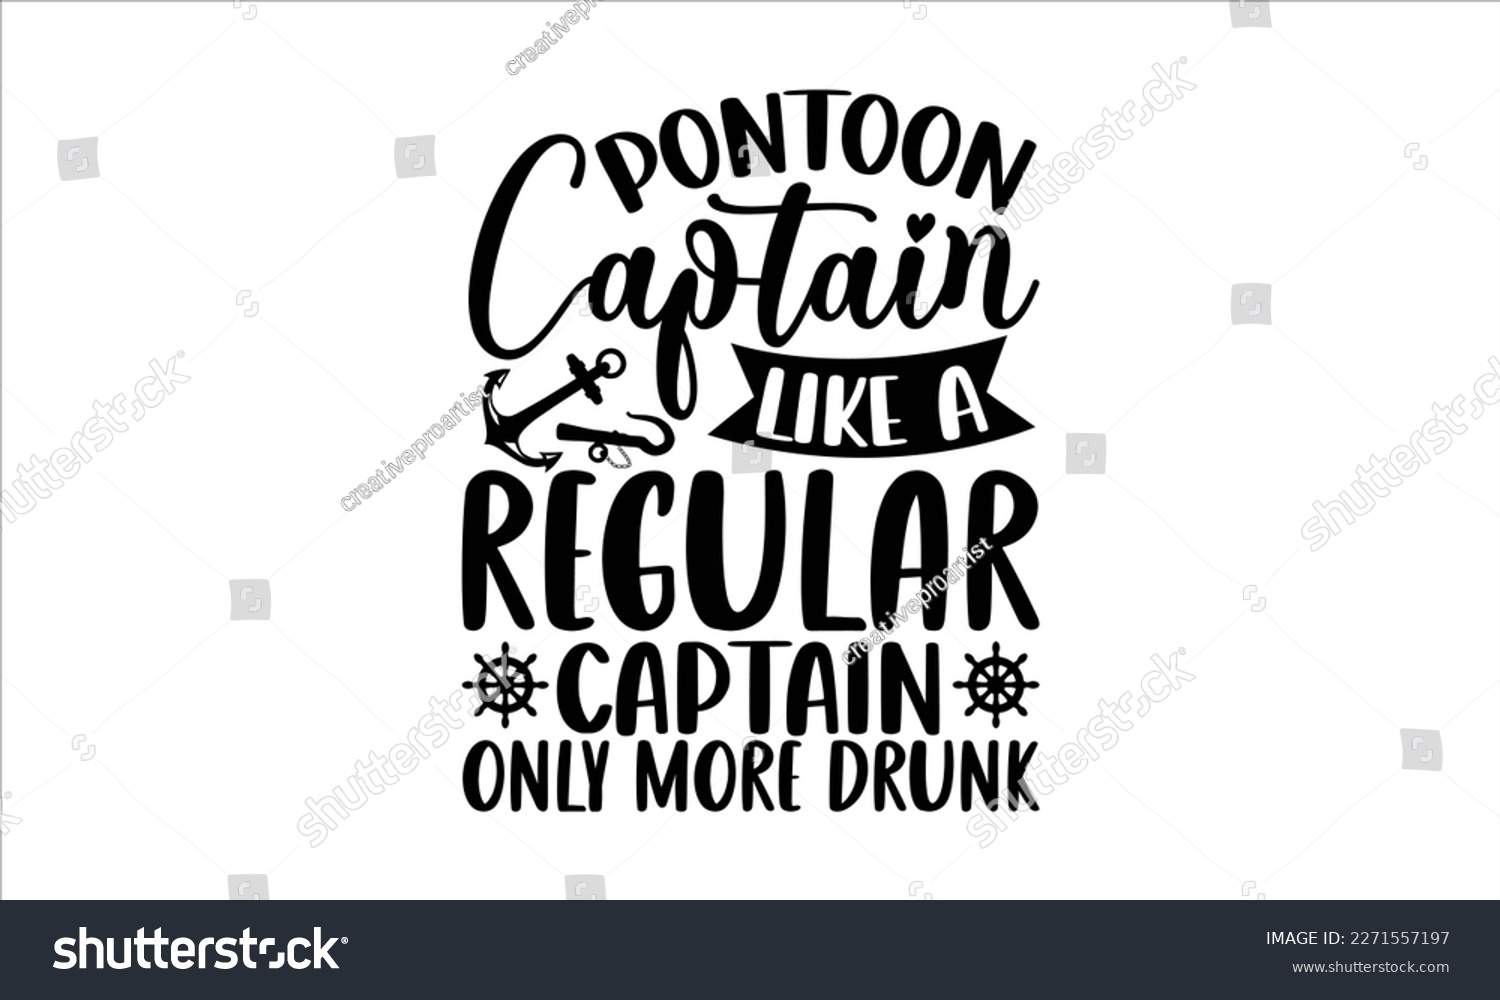 SVG of Pontoon captain like a regular captain only more drunk- Boat t shirt design, Handmade calligraphy vector illustration, Svg Files for Cutting Cricut and white background, EPS svg